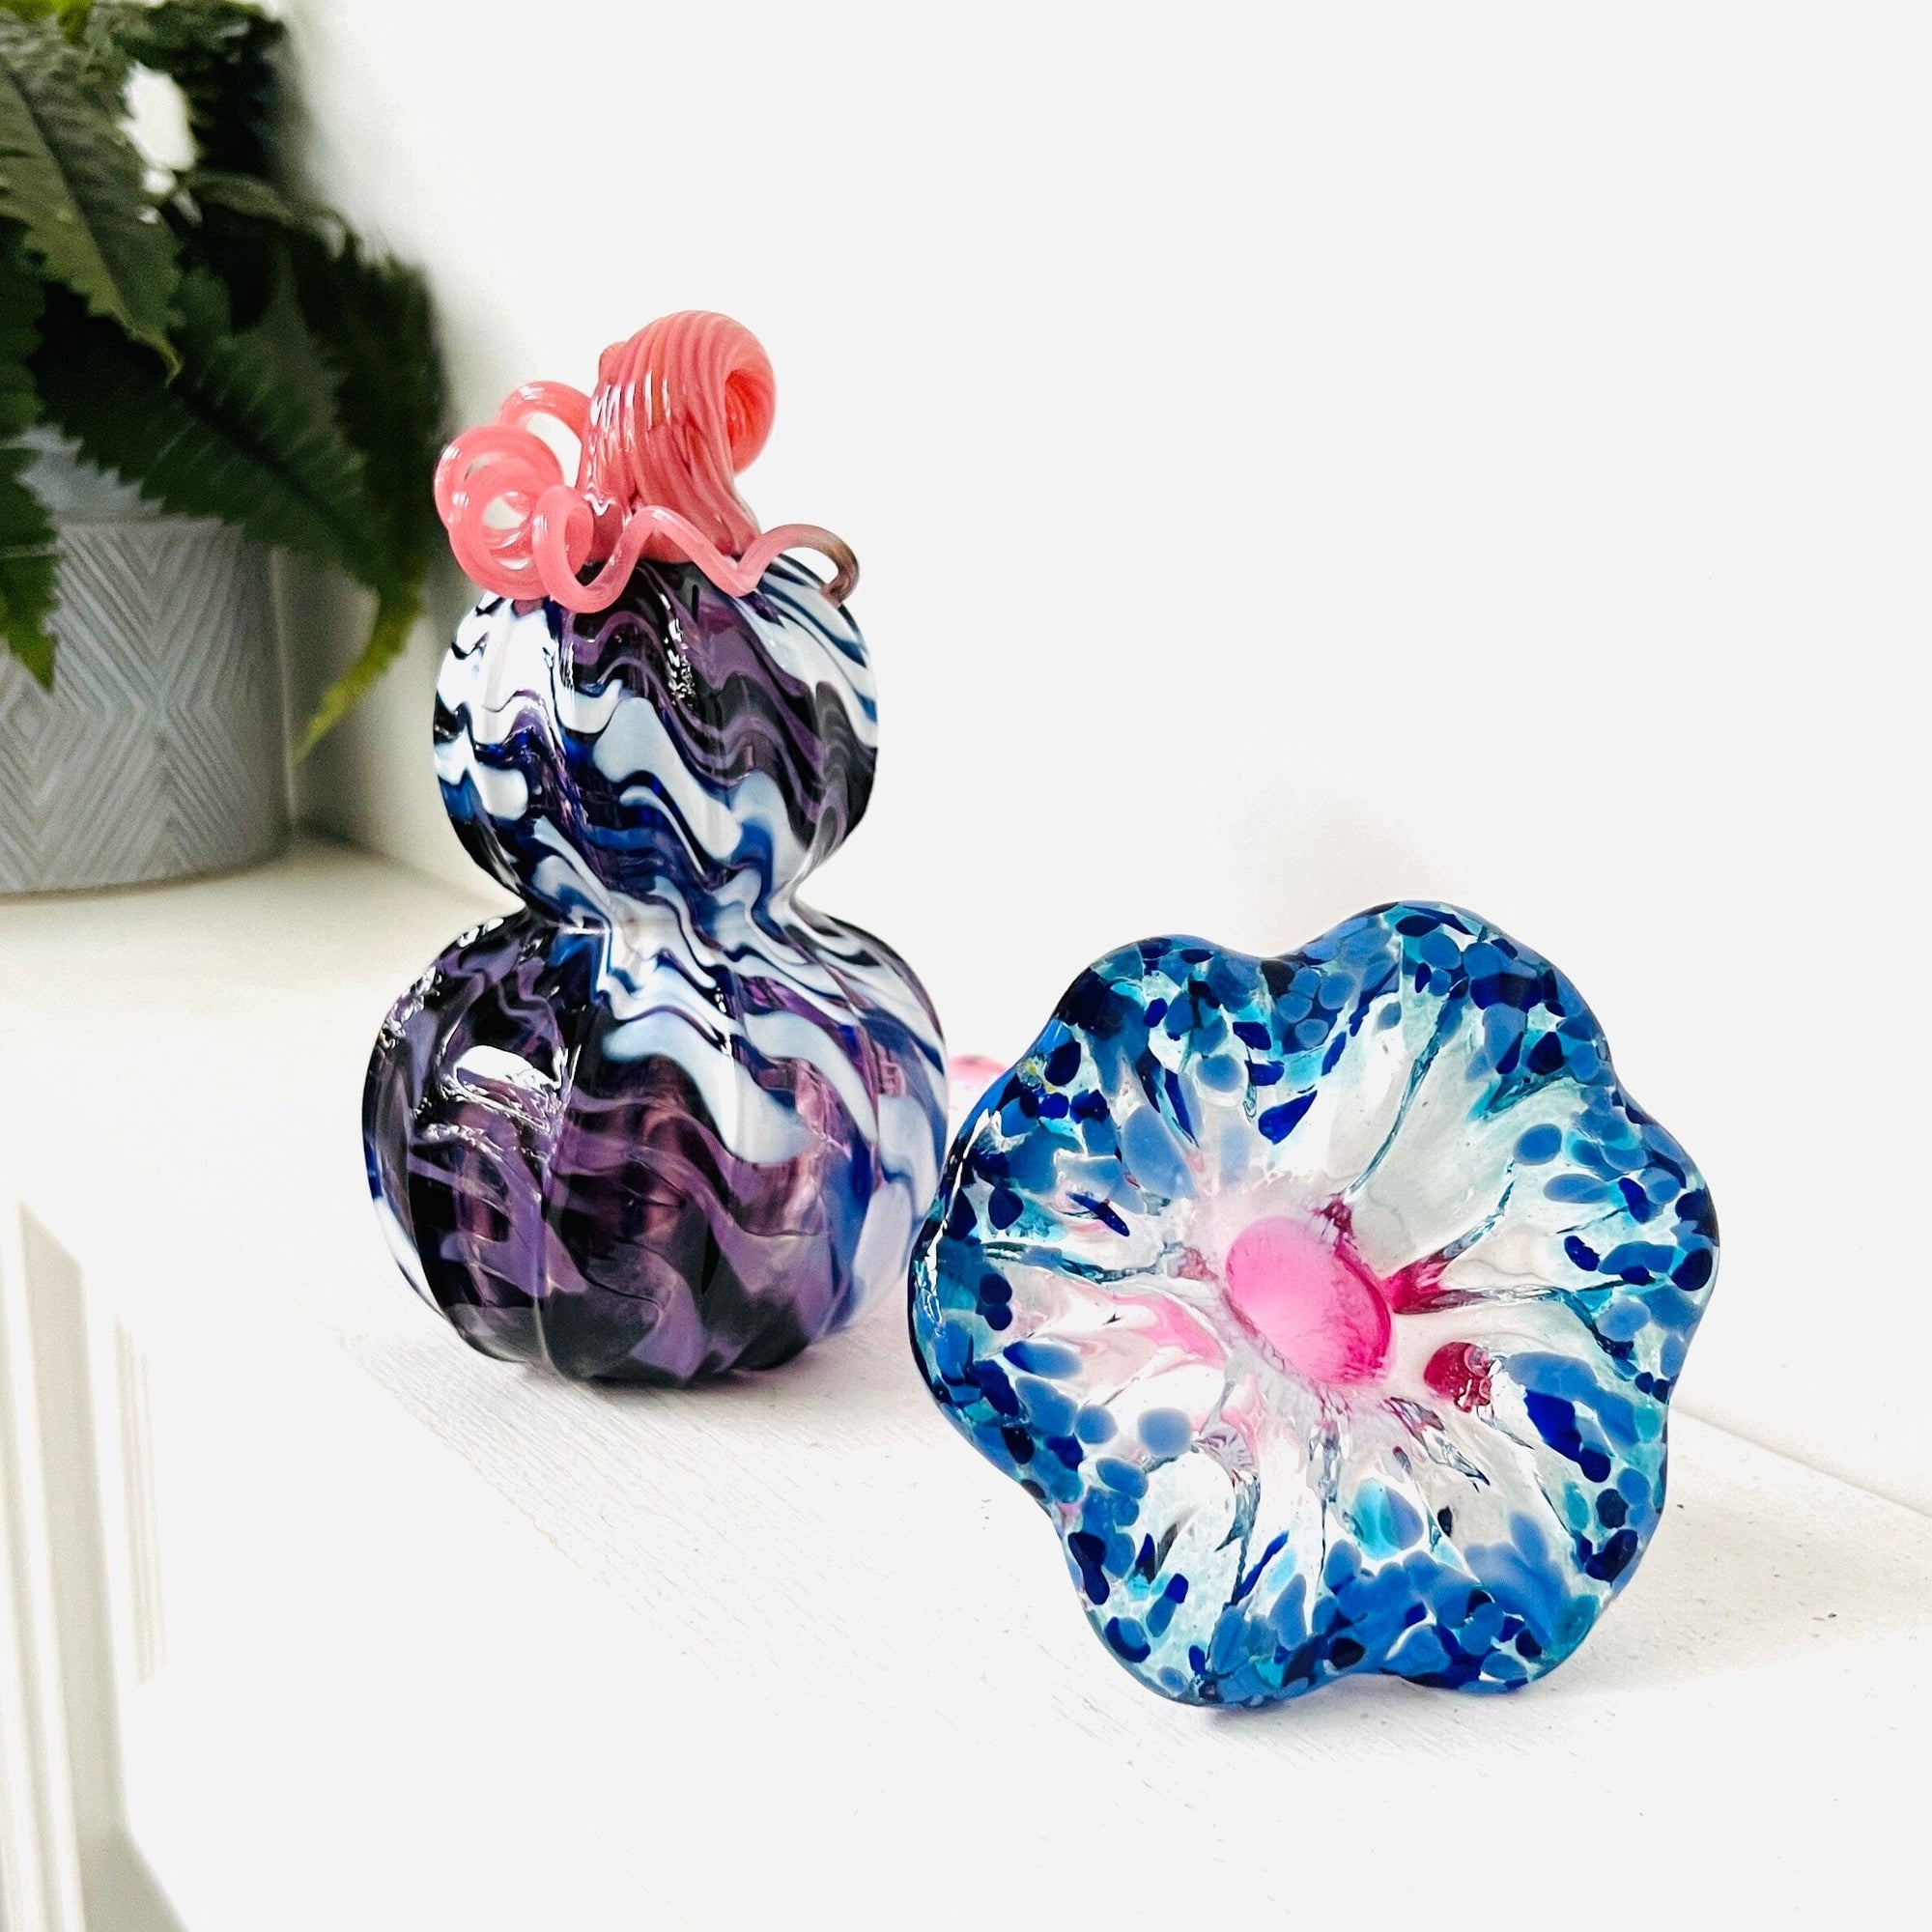 Pulled Glass Flower and Gourd Set 9 Decor Luke Adams Glass Blowing Studio 